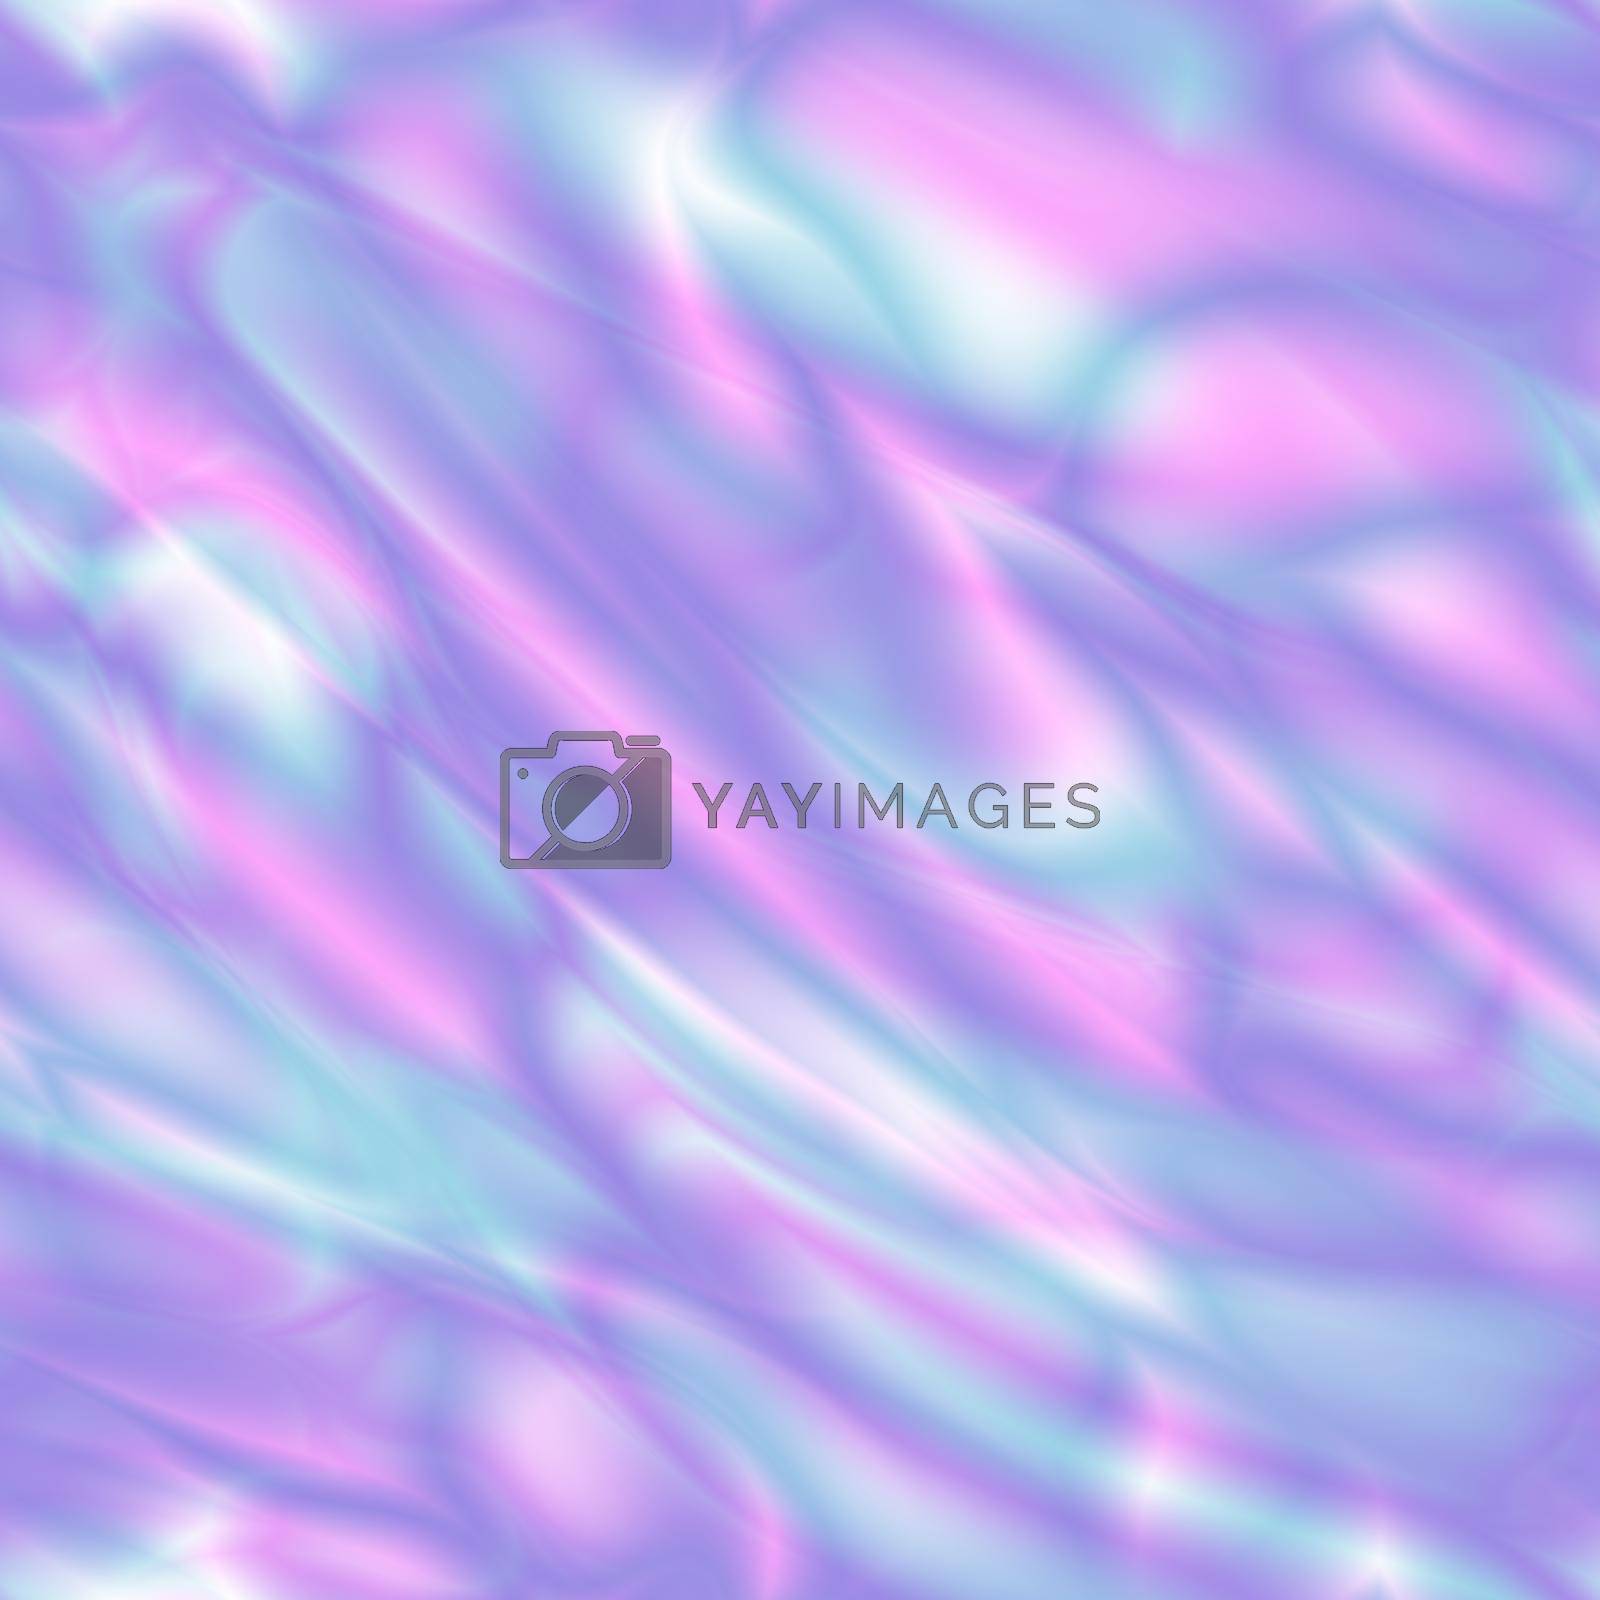 Abstract seamless smooth background with shiny silk surface